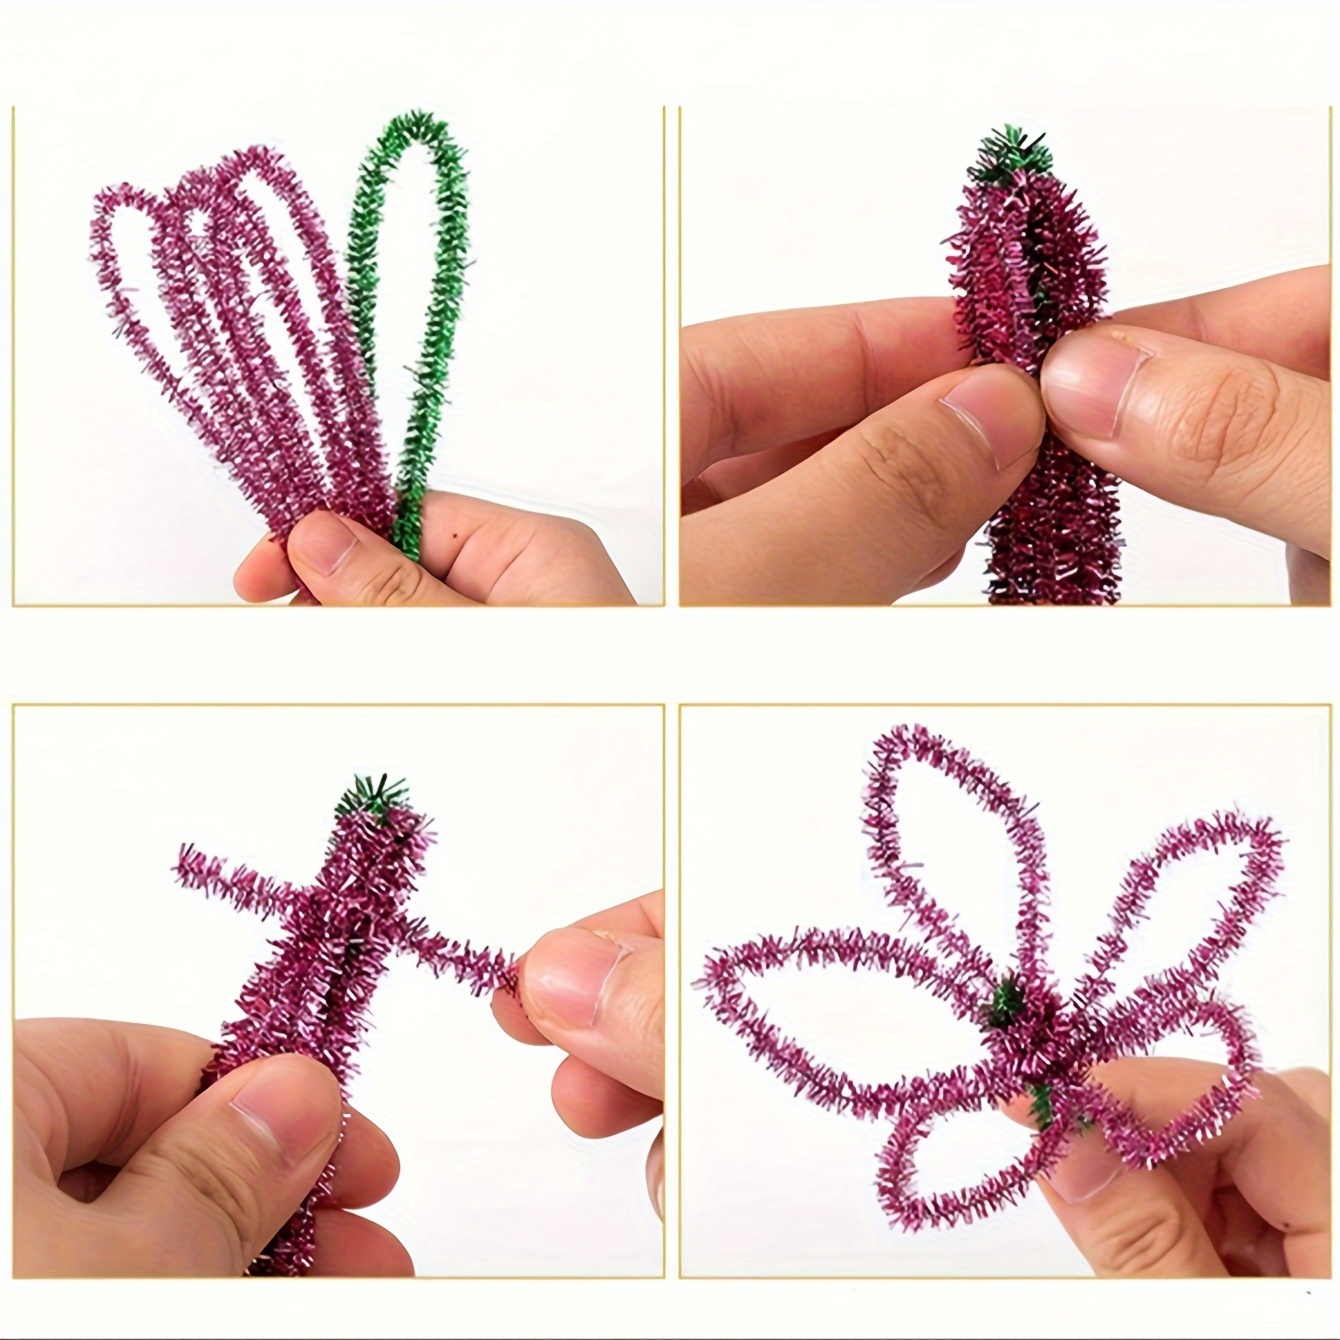 Pipe Cleaners- 100Pc. Pipe Cleaner Purple Pipe Cleaners-Chenille Stems,  Pipe Cleaners Craft, Fuzzy Sticks Great Craft Supplies DIY Art & Craft  Projects